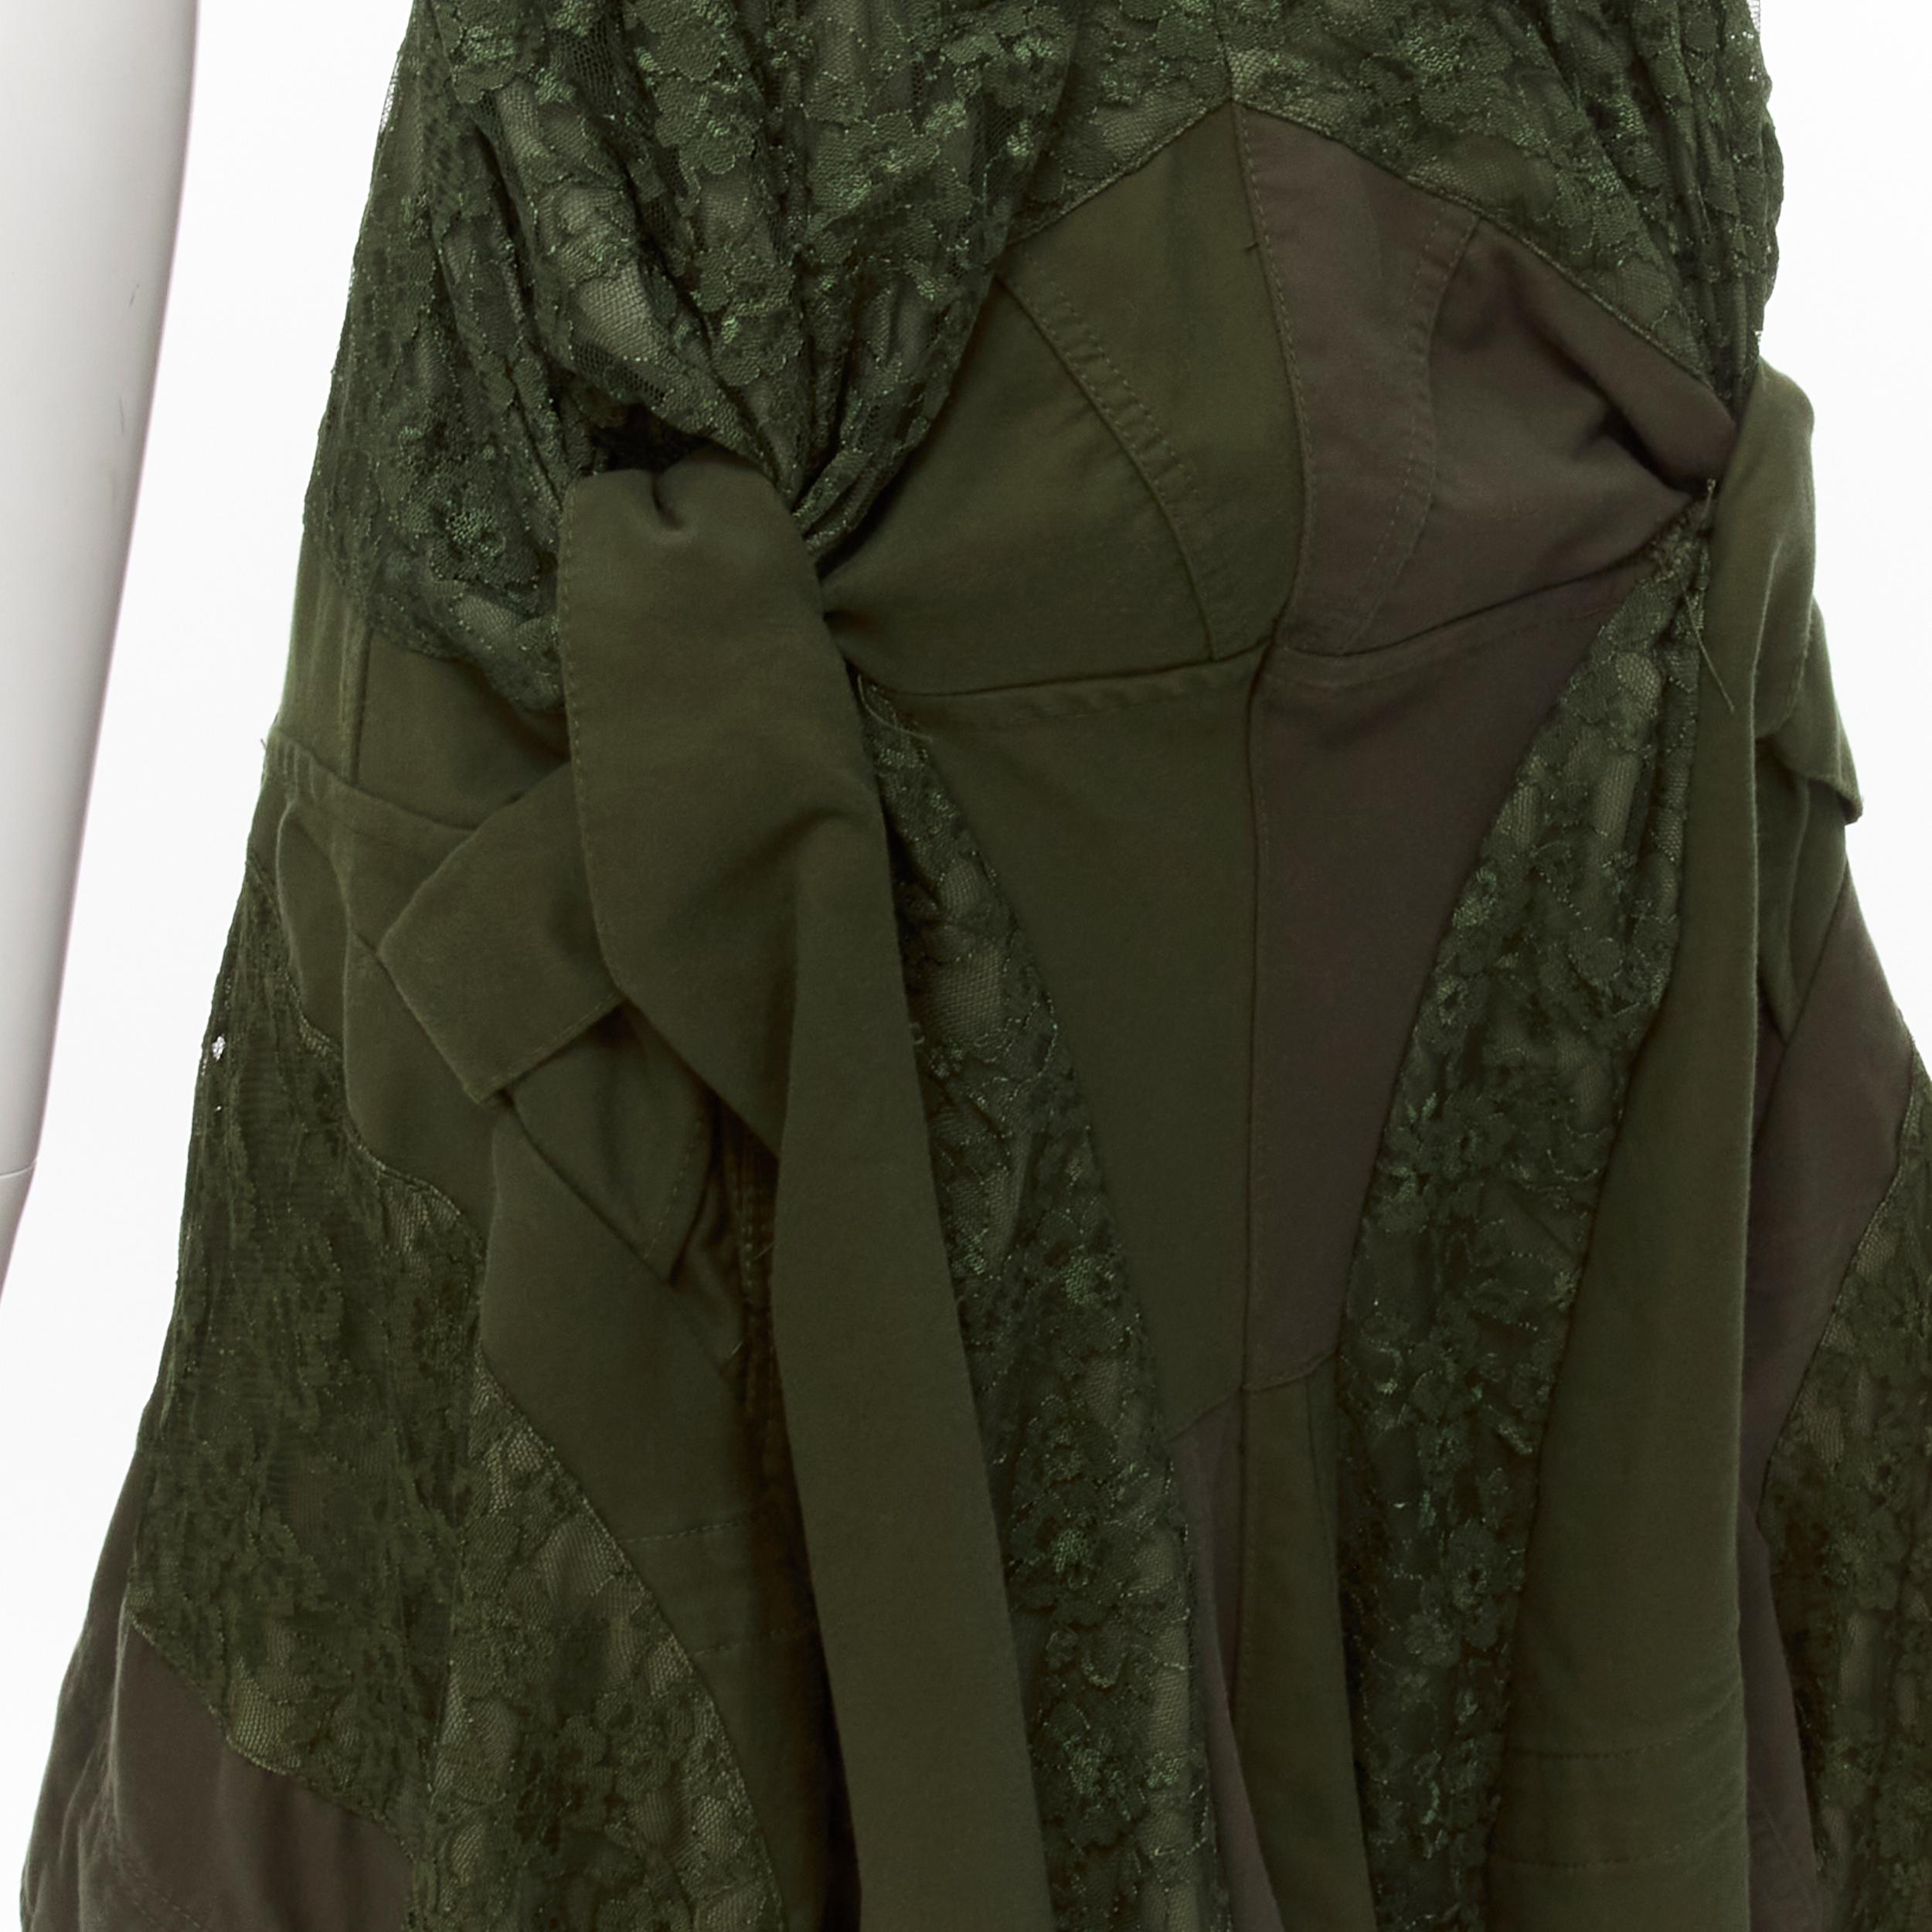 JUNYA WATANABE 2006 Runway military green lace deconstructed dress XS 
Reference: CRTI/A00680 
Brand: Junya Watanabe 
Designer: Junya Watanabe 
Collection: AD2006 Runway 
Material: Cotton 
Color: Green 
Pattern: Solid 
Closure: Zip 
Extra Detail: